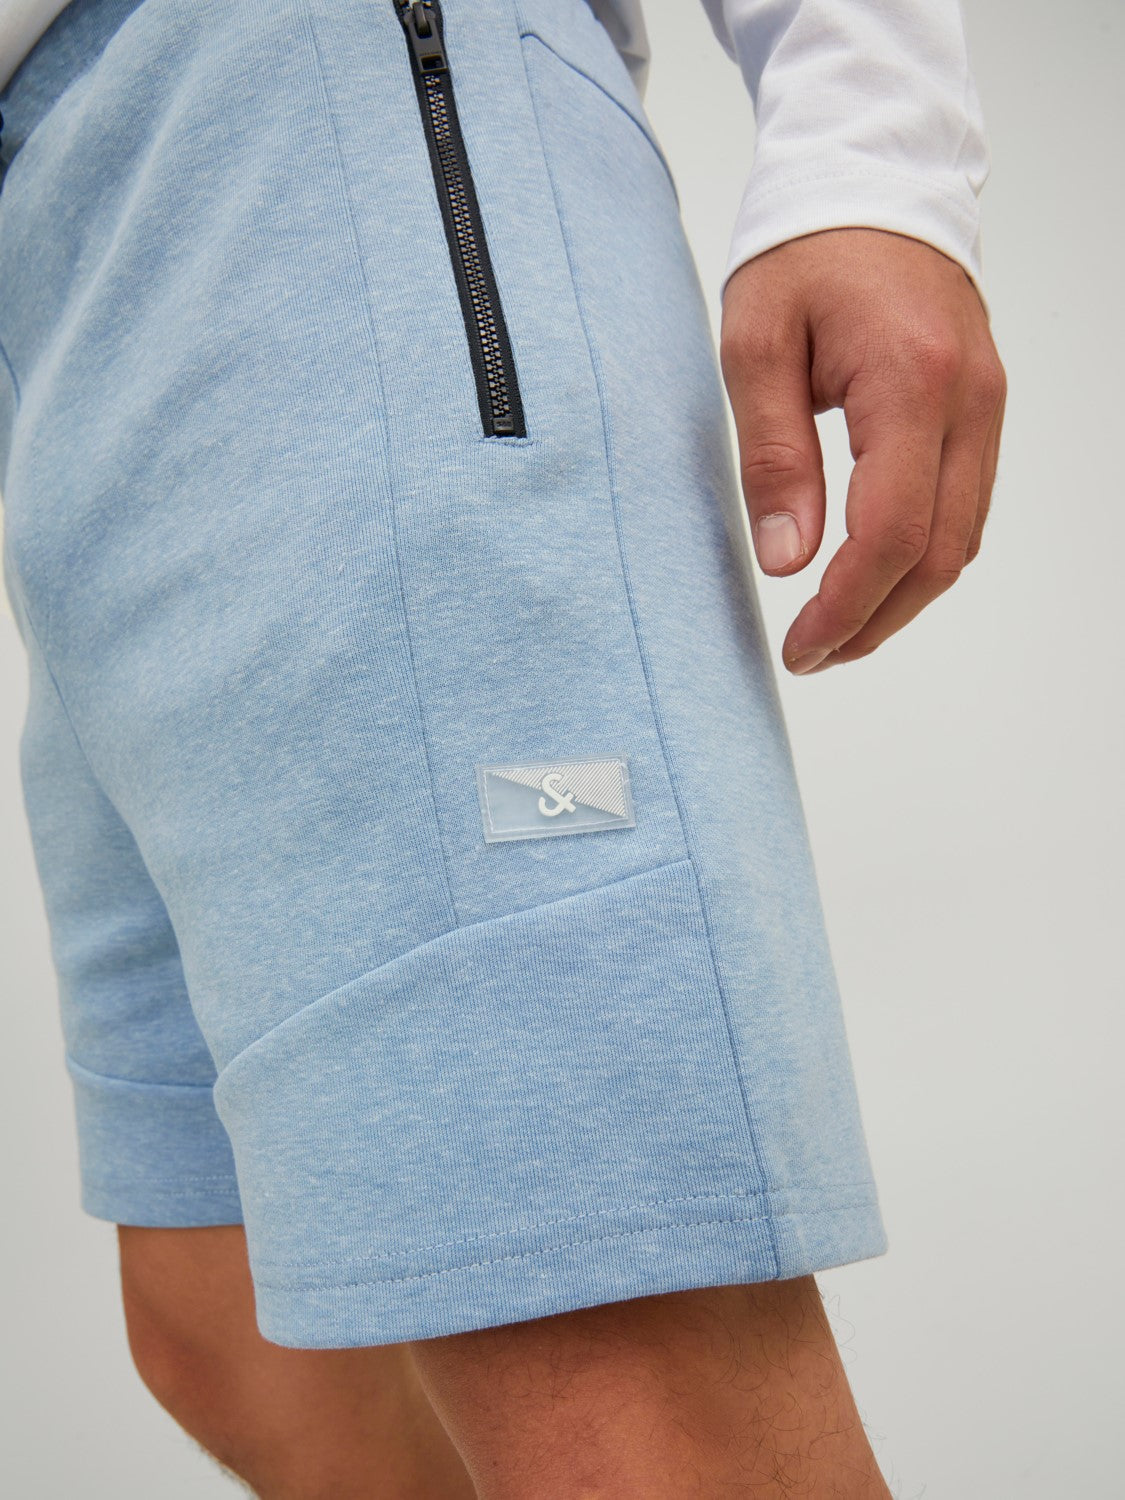 Air Sweat Mountain Spring Shorts-Side pocket view